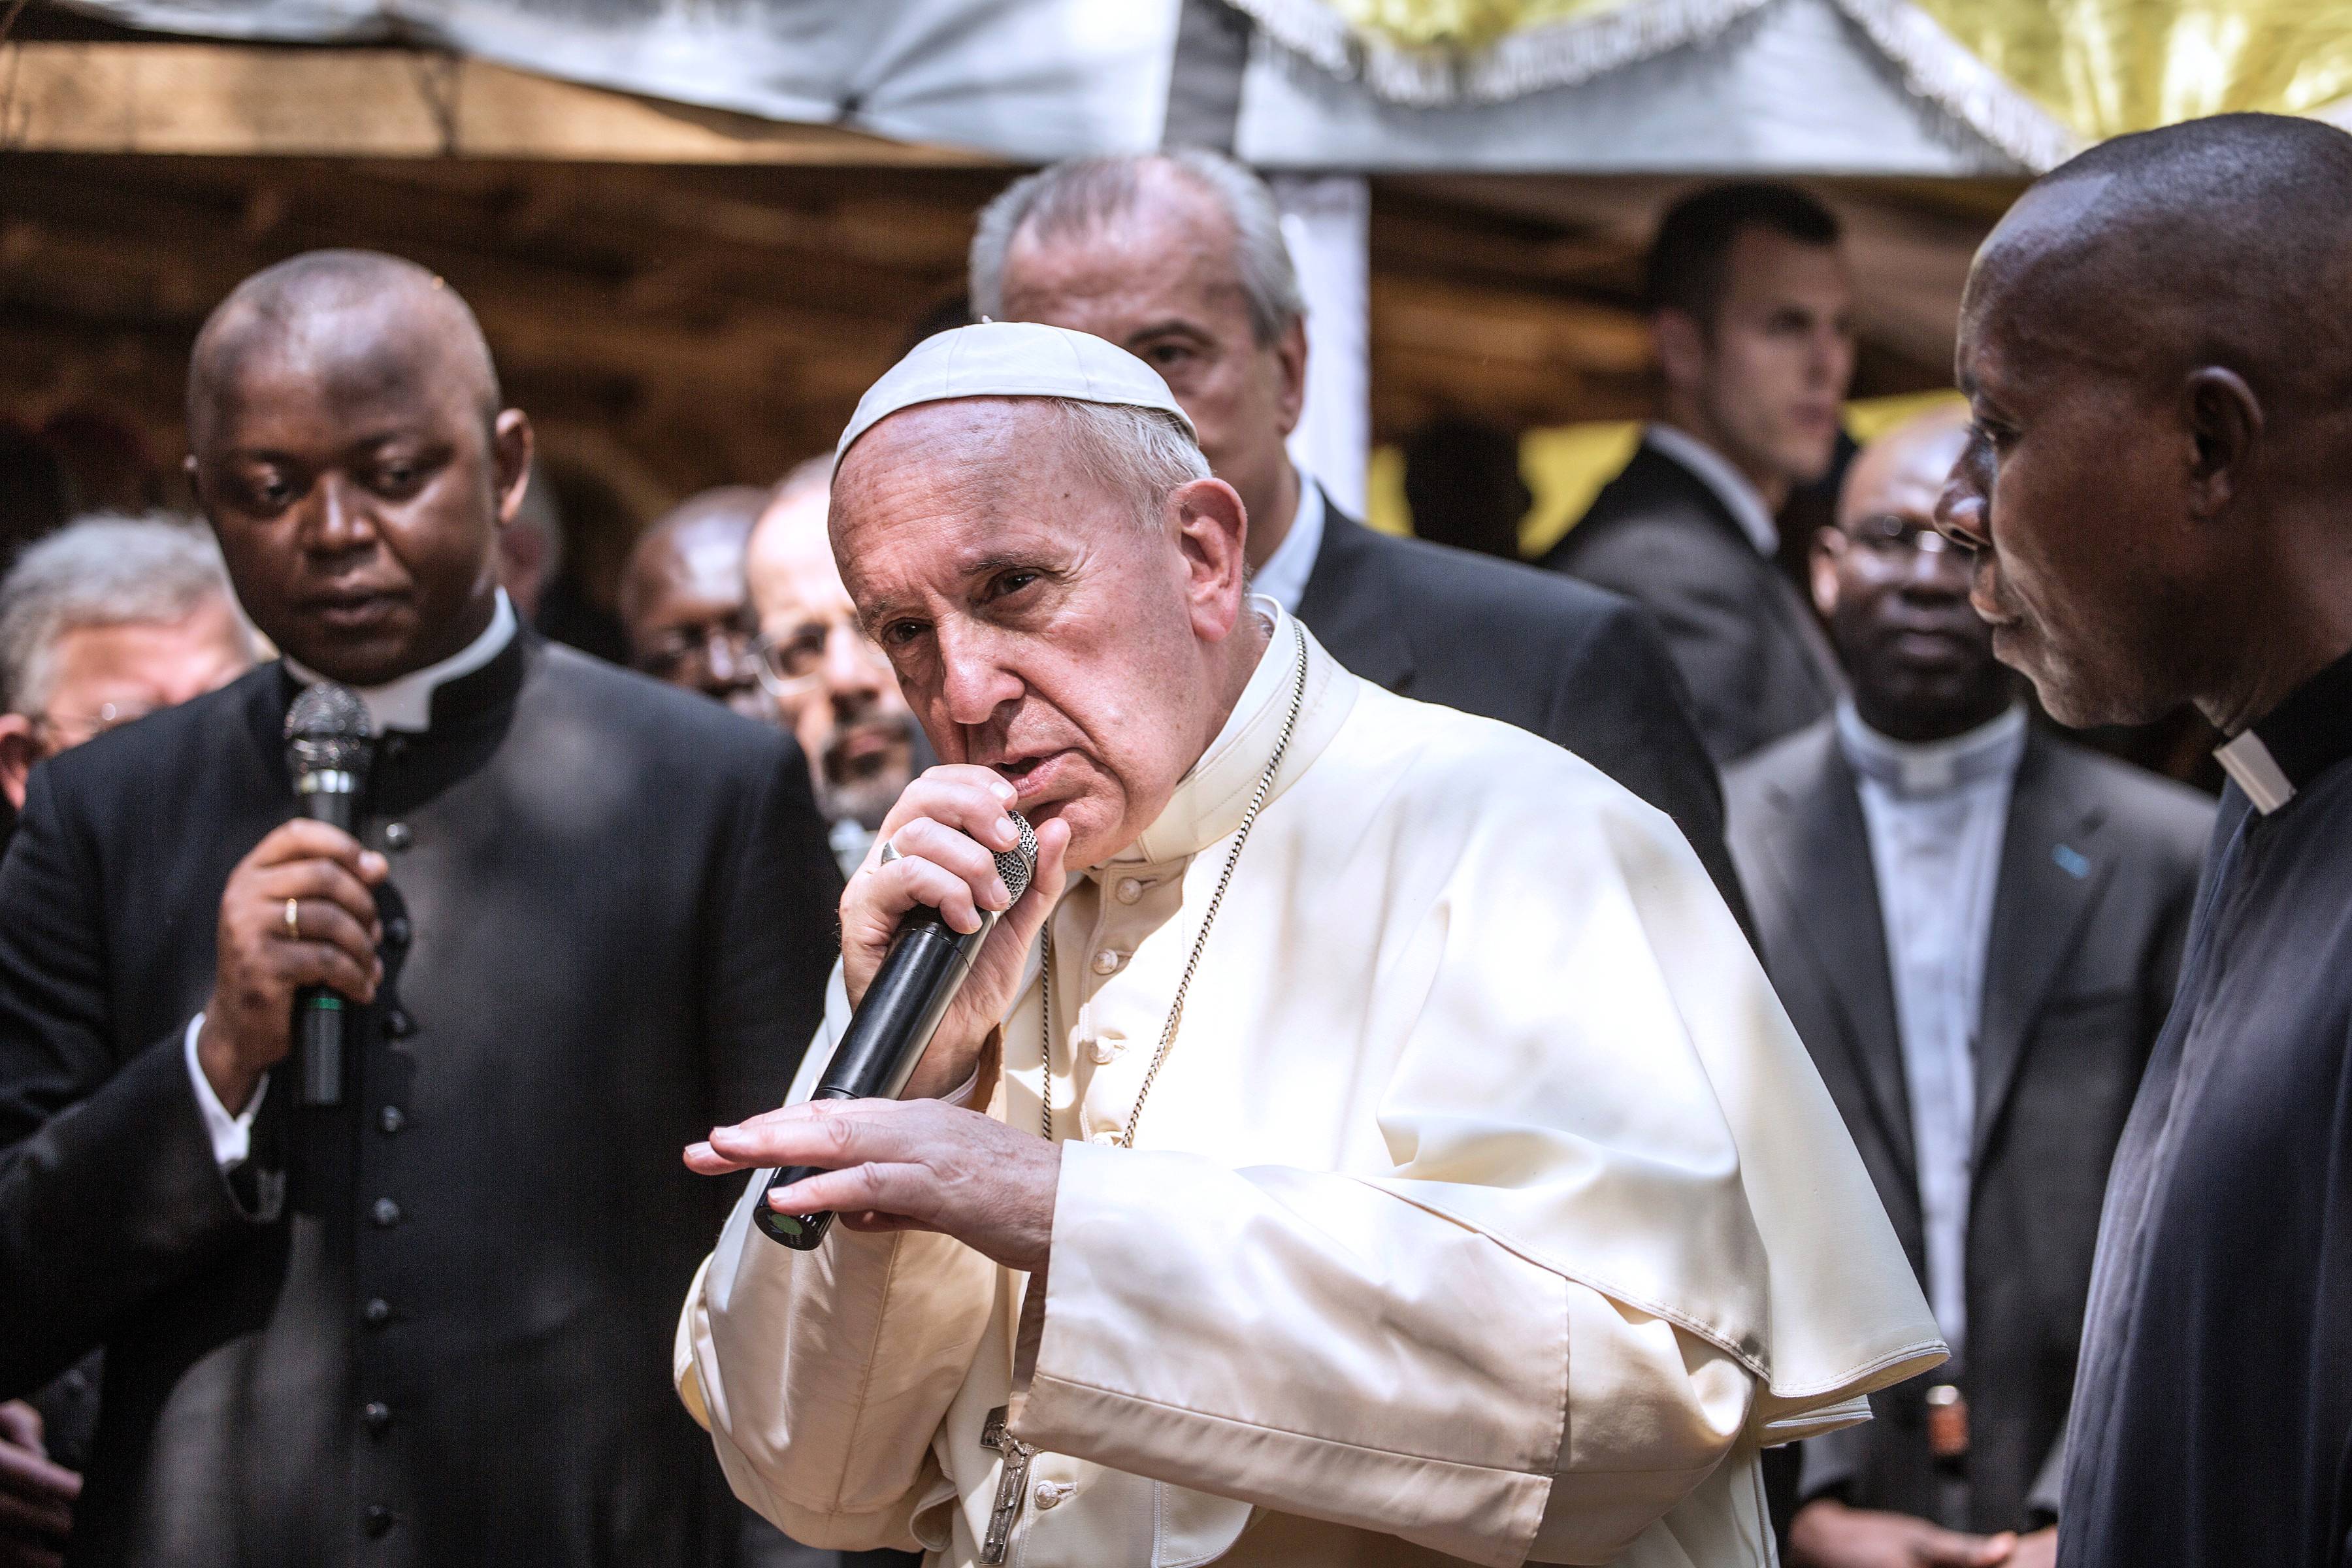 All I Need Is One Mic - All it took was one photo. The Pope in mid sentence ideally saying something quite prophetic, but when it hit the web, none of that even mattered. Twitter lost its mind at Pope Francis' freestyle like stance and the rest was history. If you thought he just dished out blessings, you never seen the pope spit on the 8-mile beat. Check out the best of #Popebars and step your pen game up. -George Chapman, Jr.(Photo: GIANLUIGI GUERCIA/AFP/Getty Images)